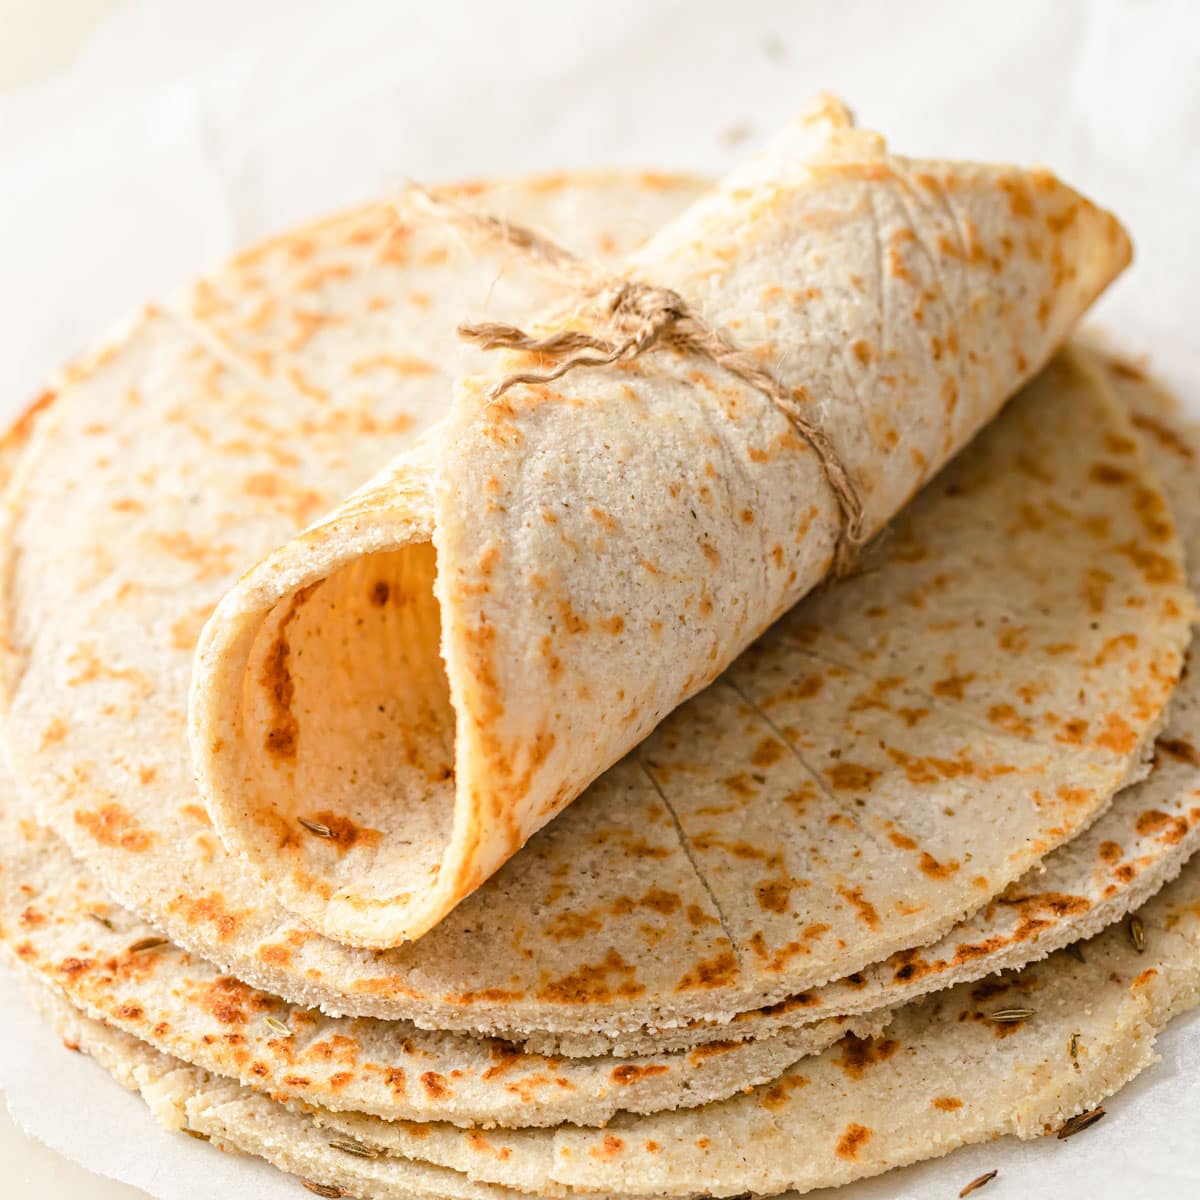 A rolled up tortilla on a stack of more tortillas.